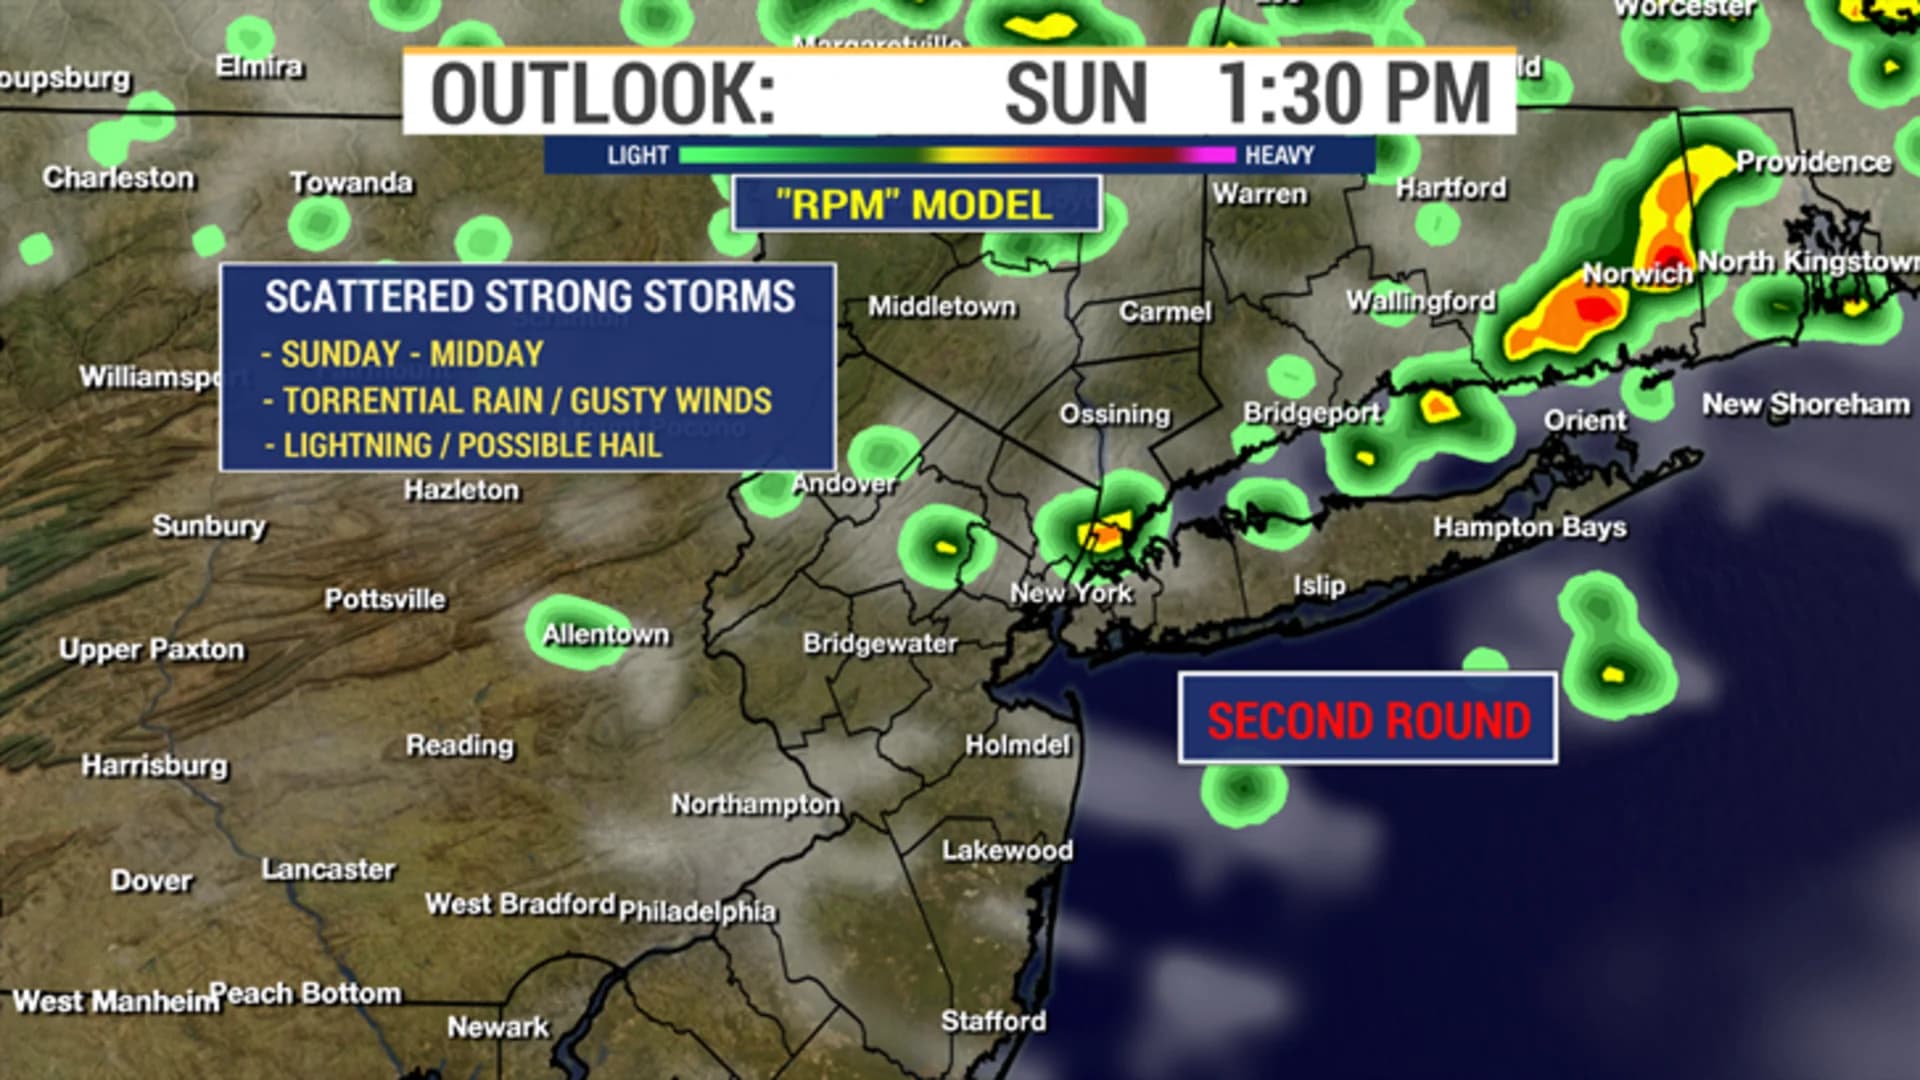 More storm activity possible for the city Sunday